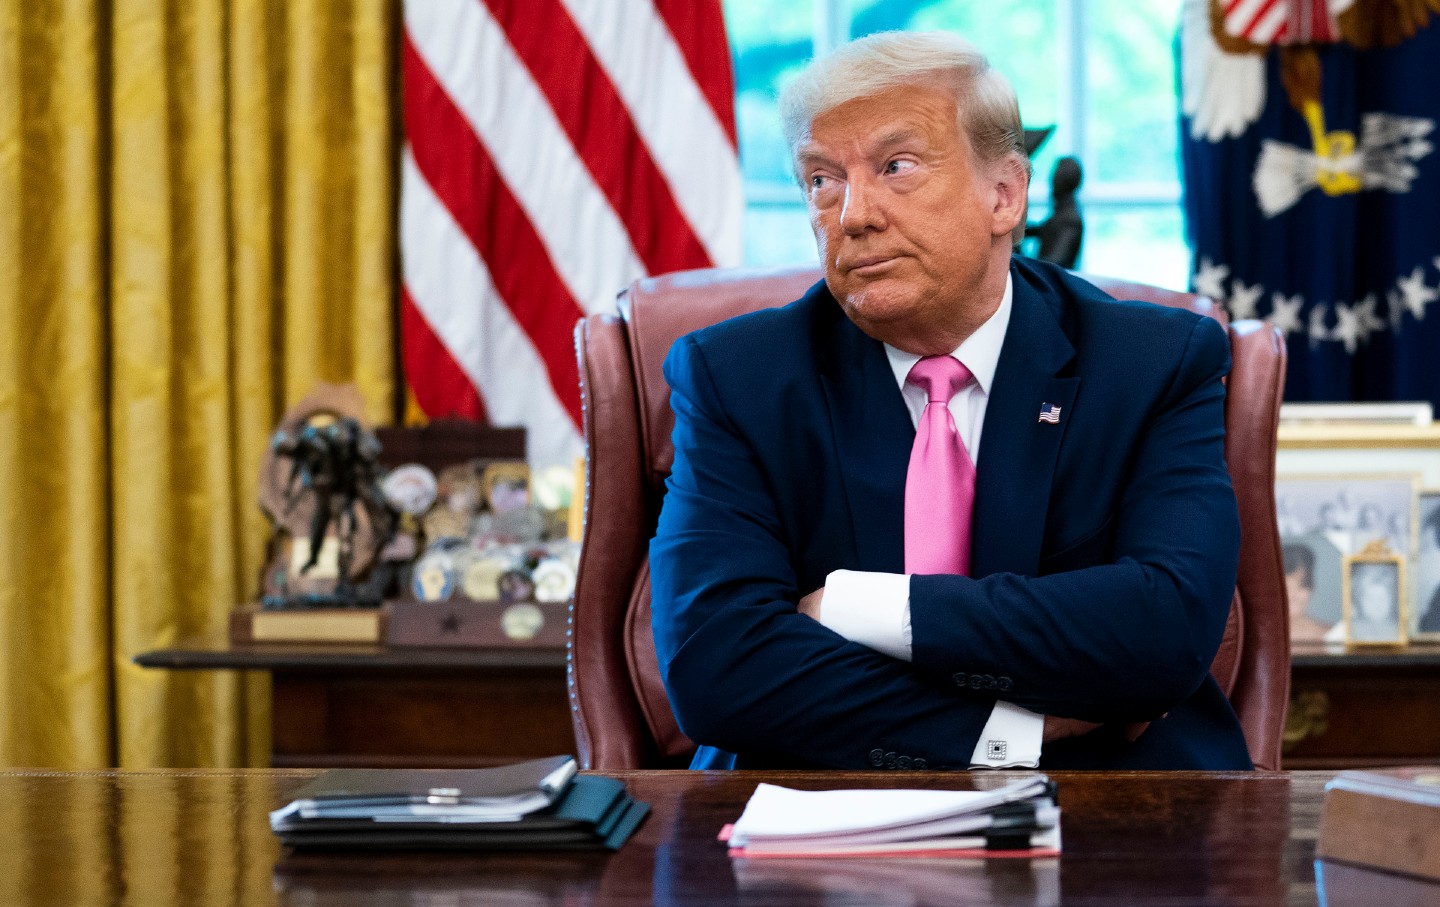 Donald Trump sits at his desk in the Oval Office, making a pouting face